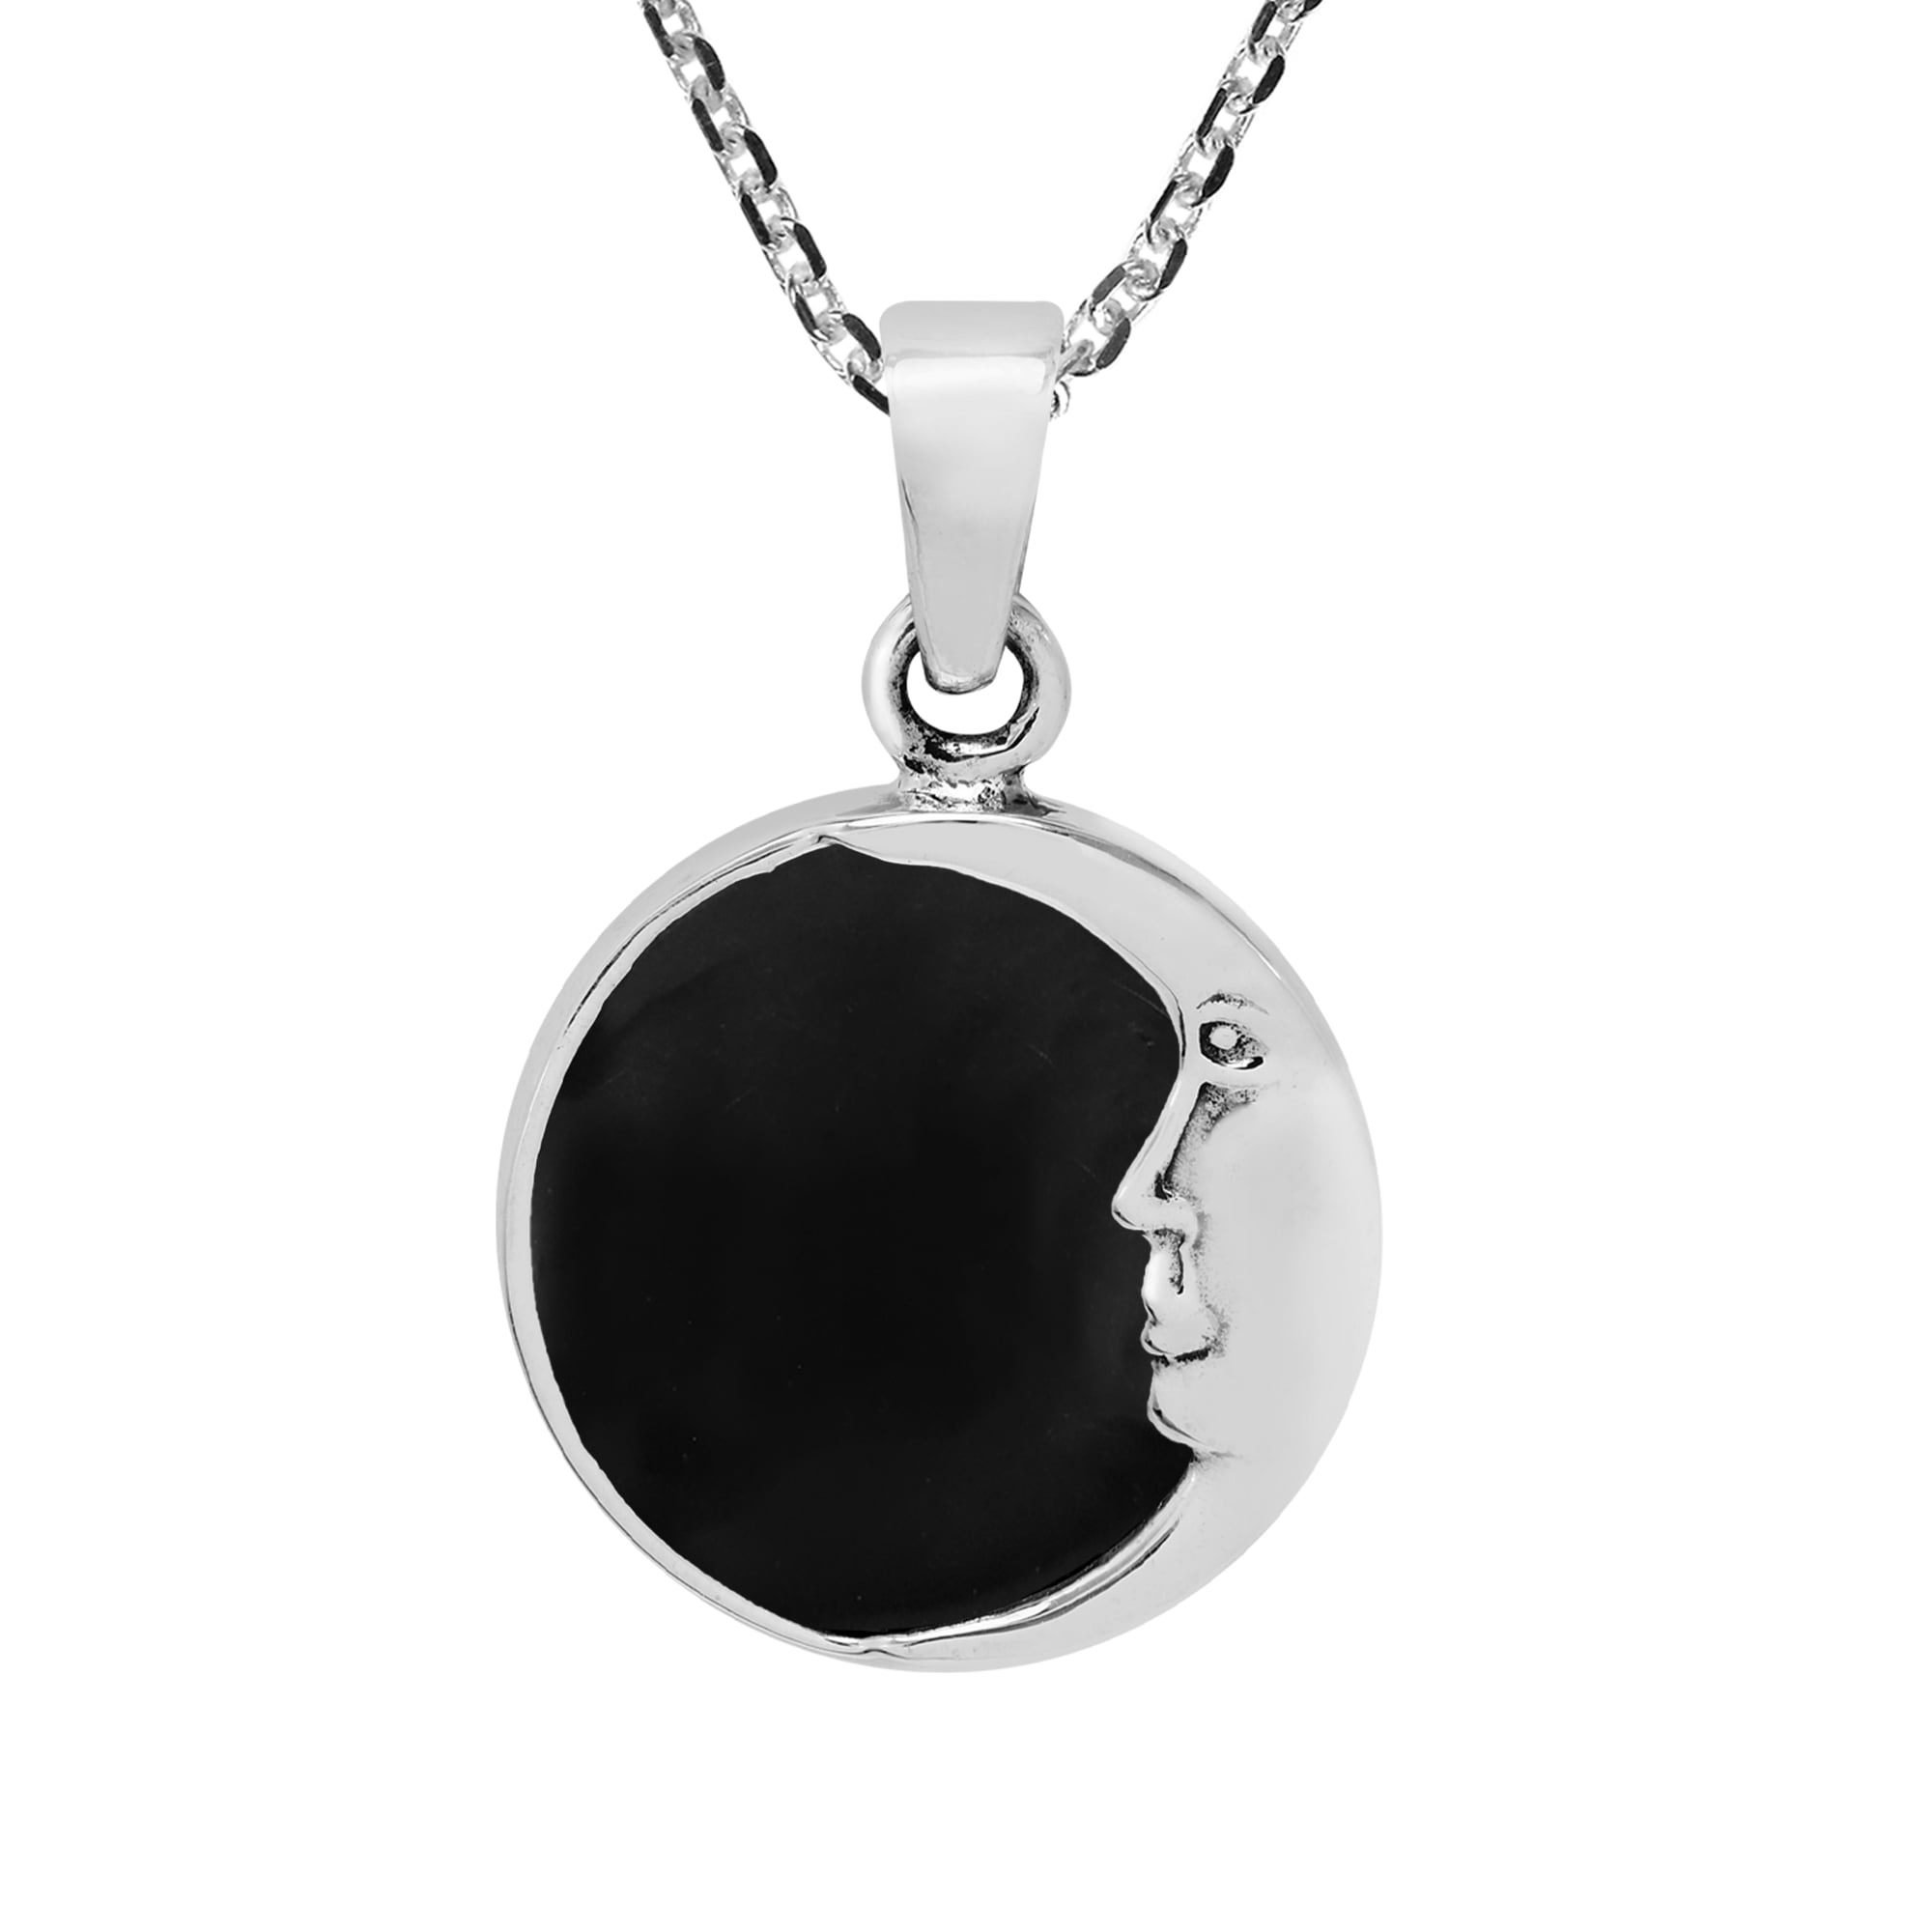 Wanderer’s Guide .925 Sterling Silver Compass Simulated Black Onyx Pendant Necklace 